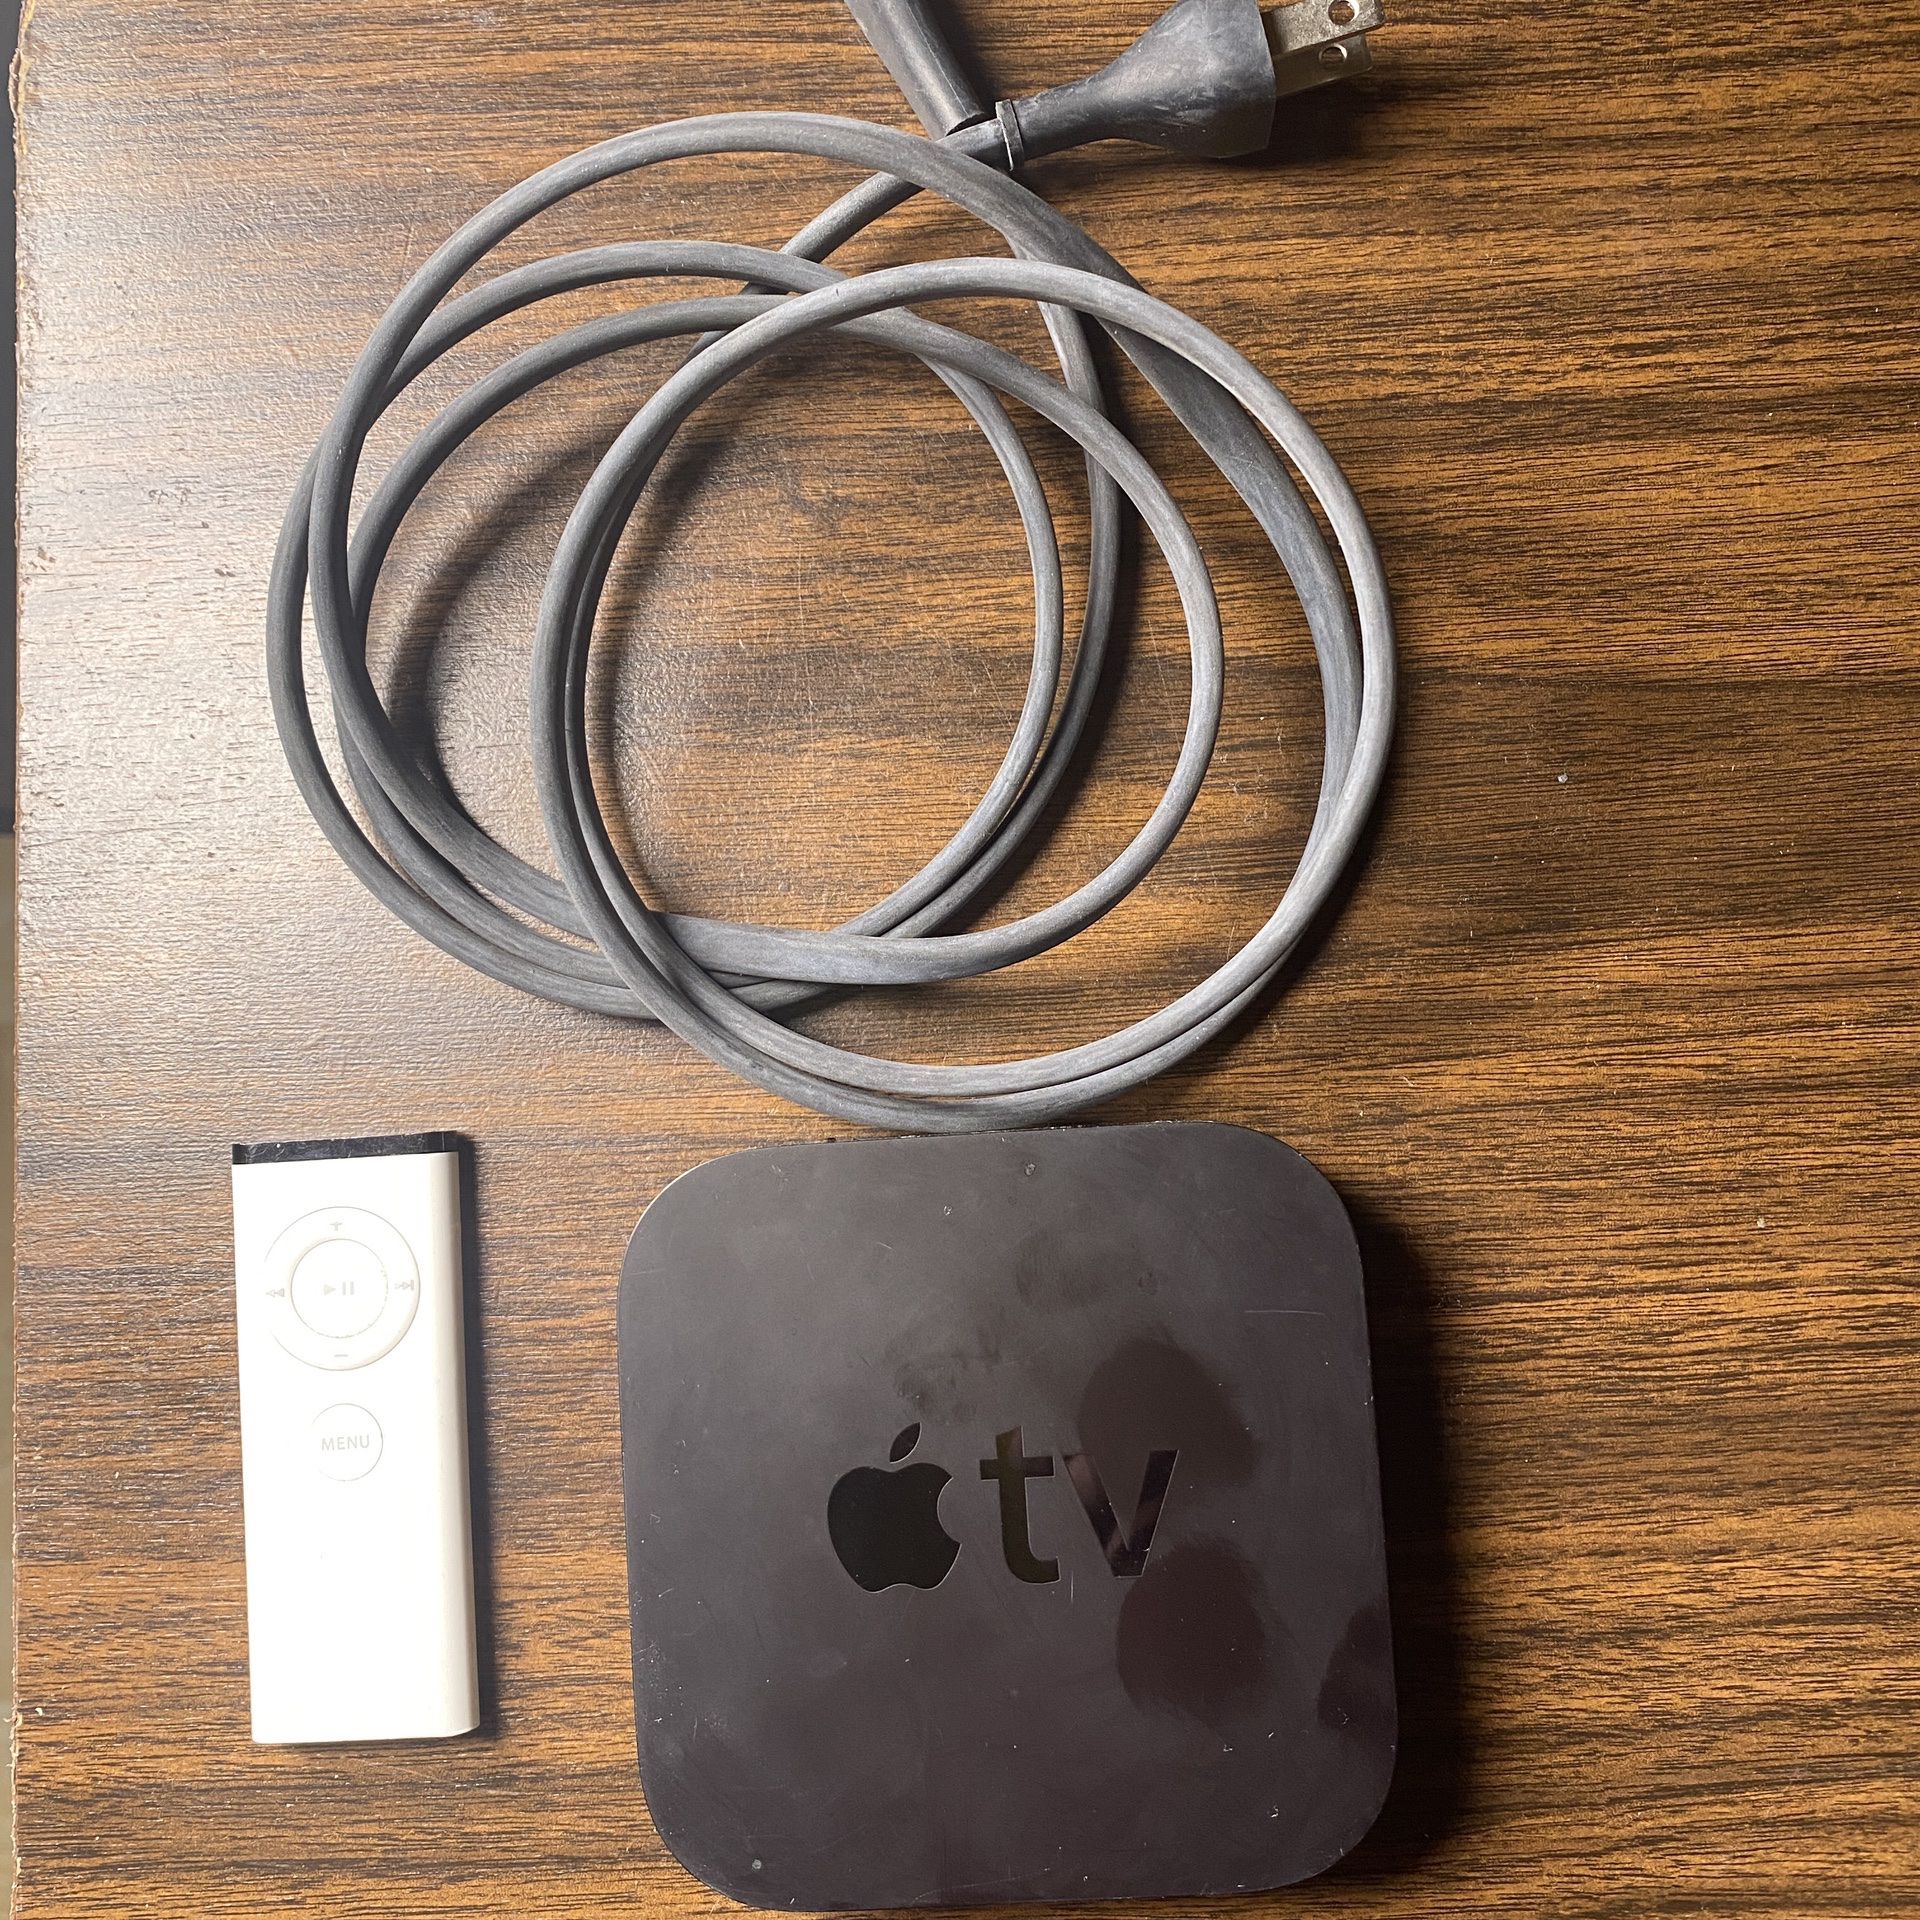 Apple TV 3rd generation with Remote